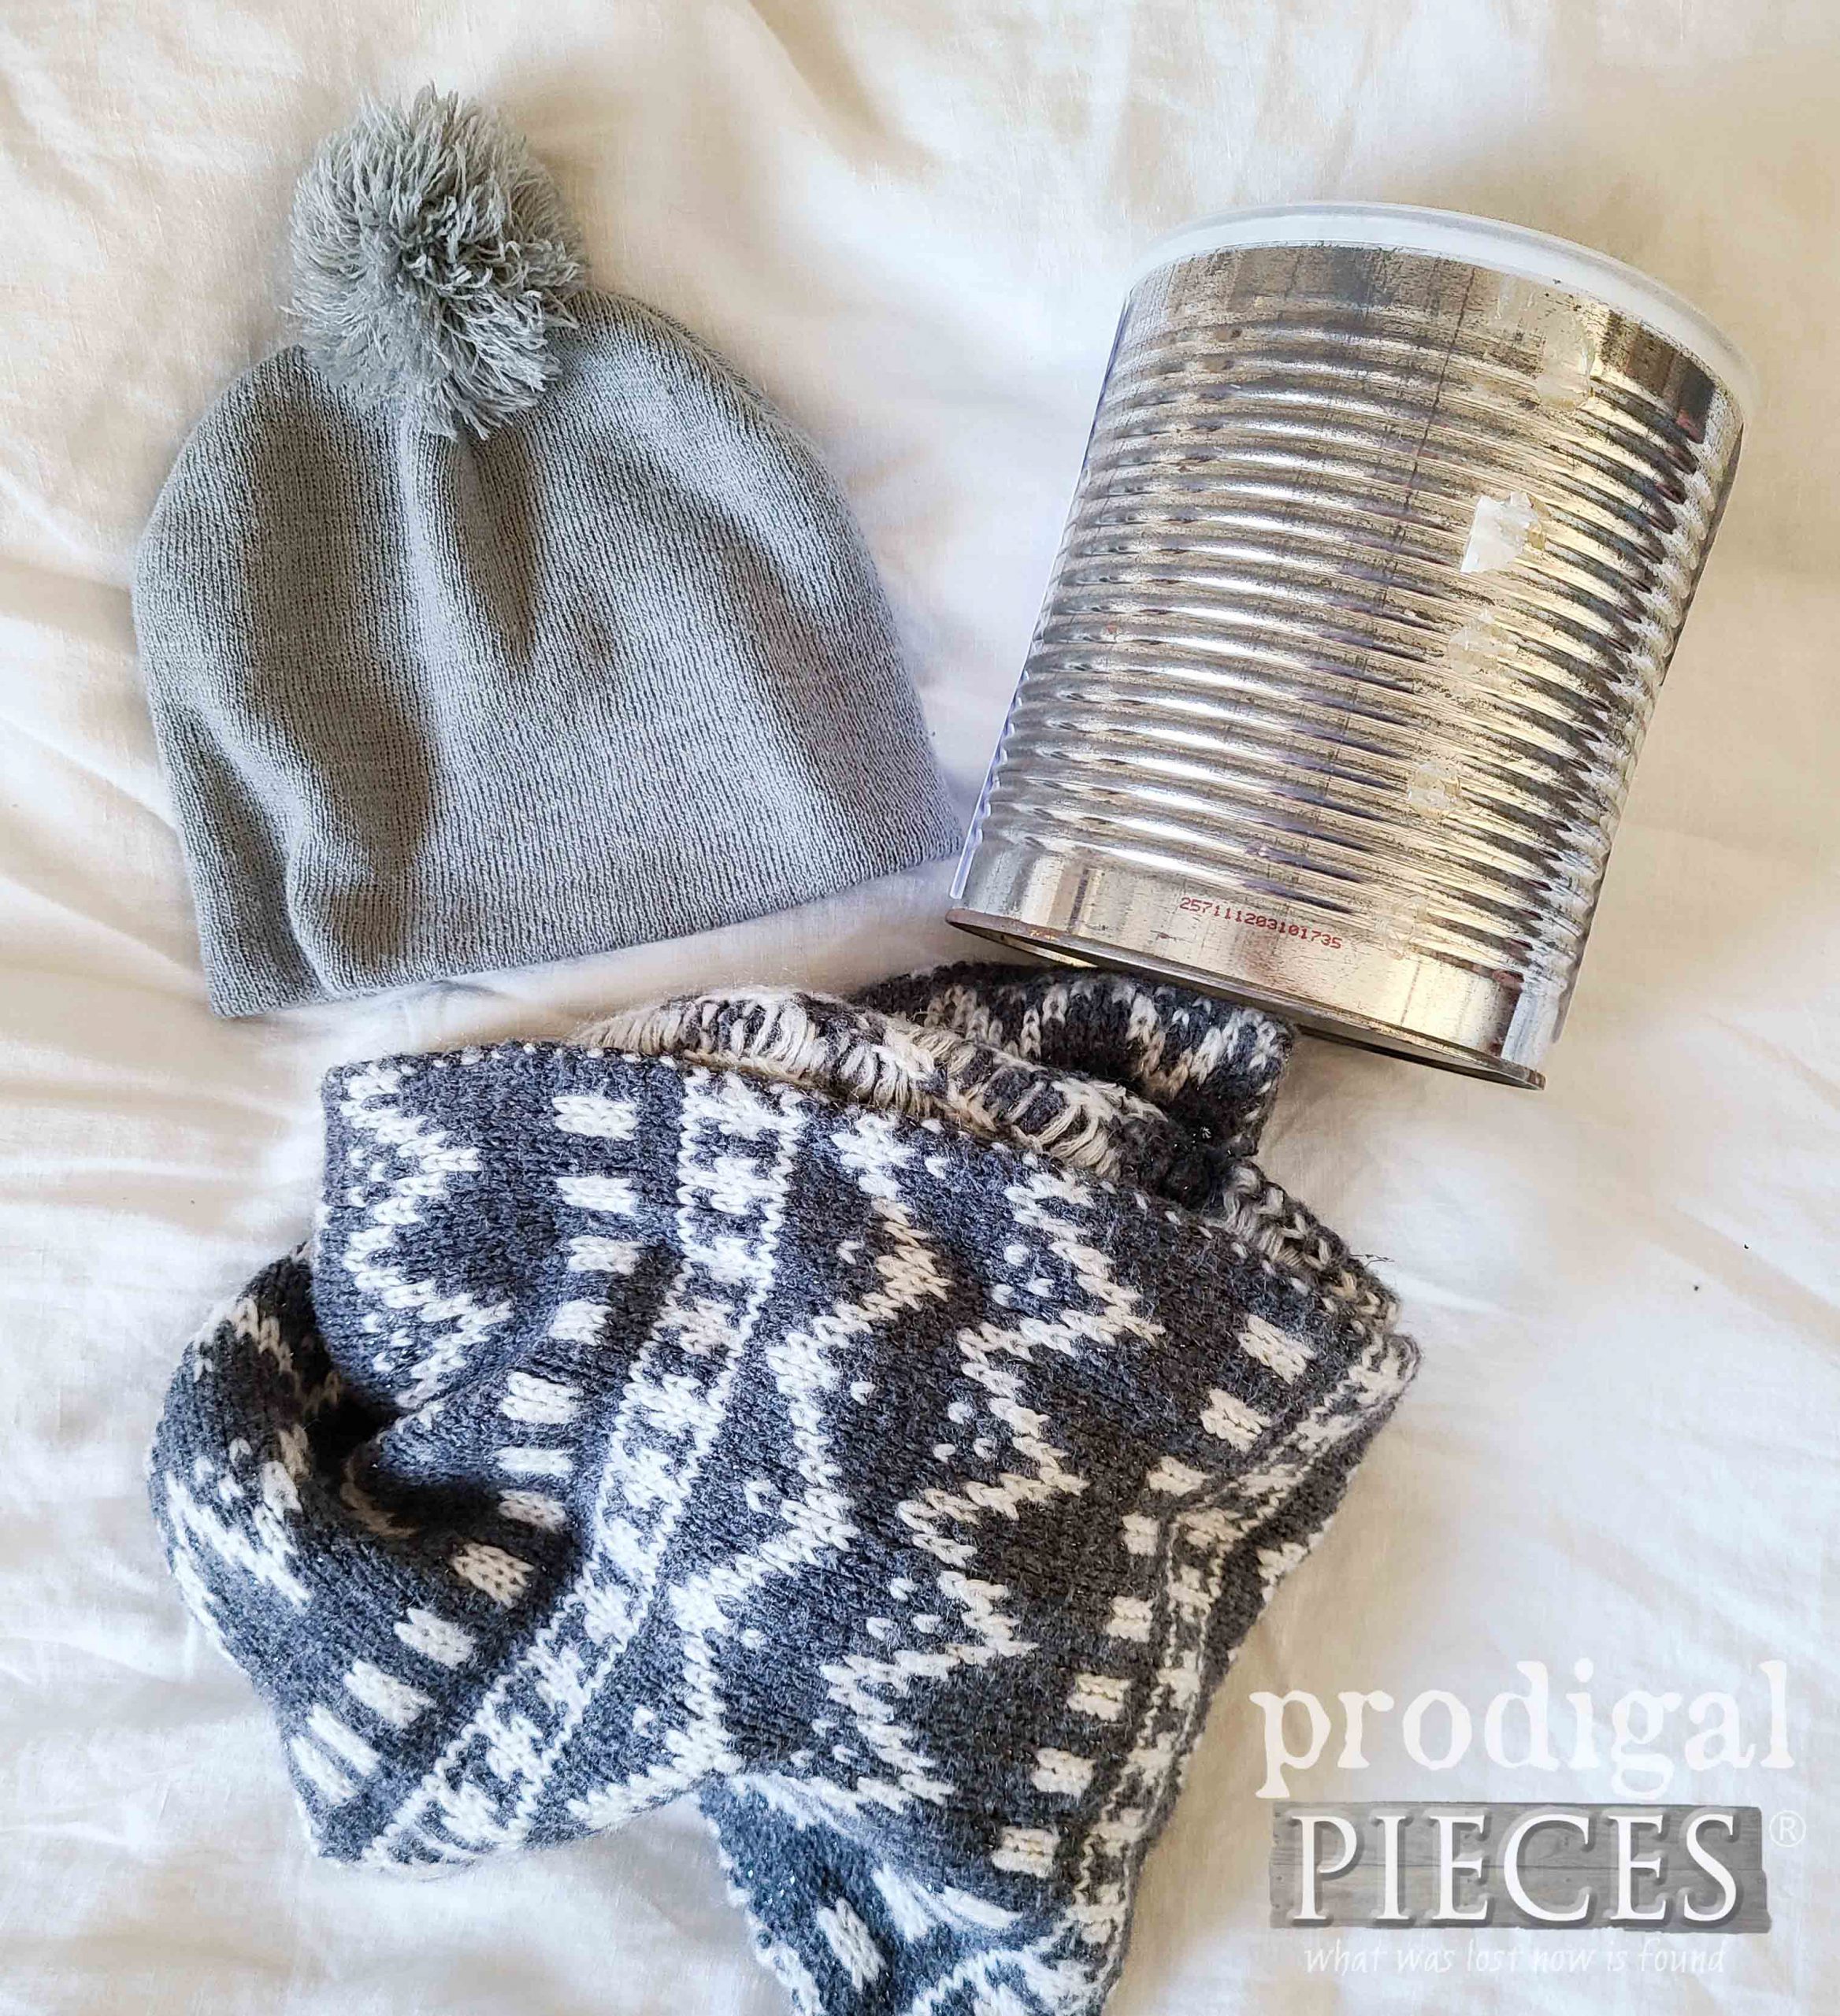 Refashion Hat and Scarf for Snowman | prodigalpieces.com #prodigalpieces #diy #snowman #holiday #christmas #kids